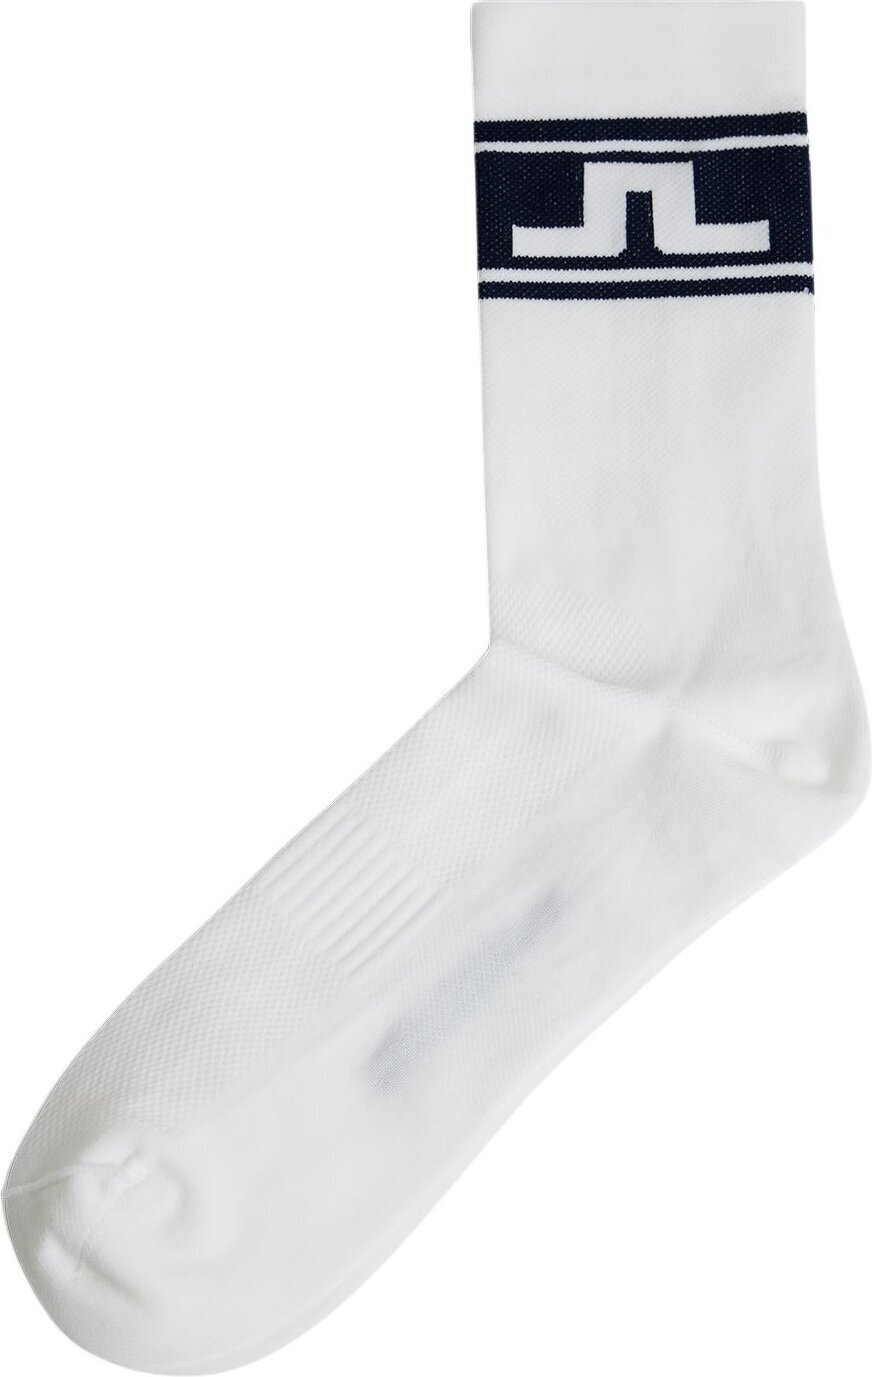 Chaussettes J.Lindeberg Percy Sock Chaussettes JL Navy 40-42